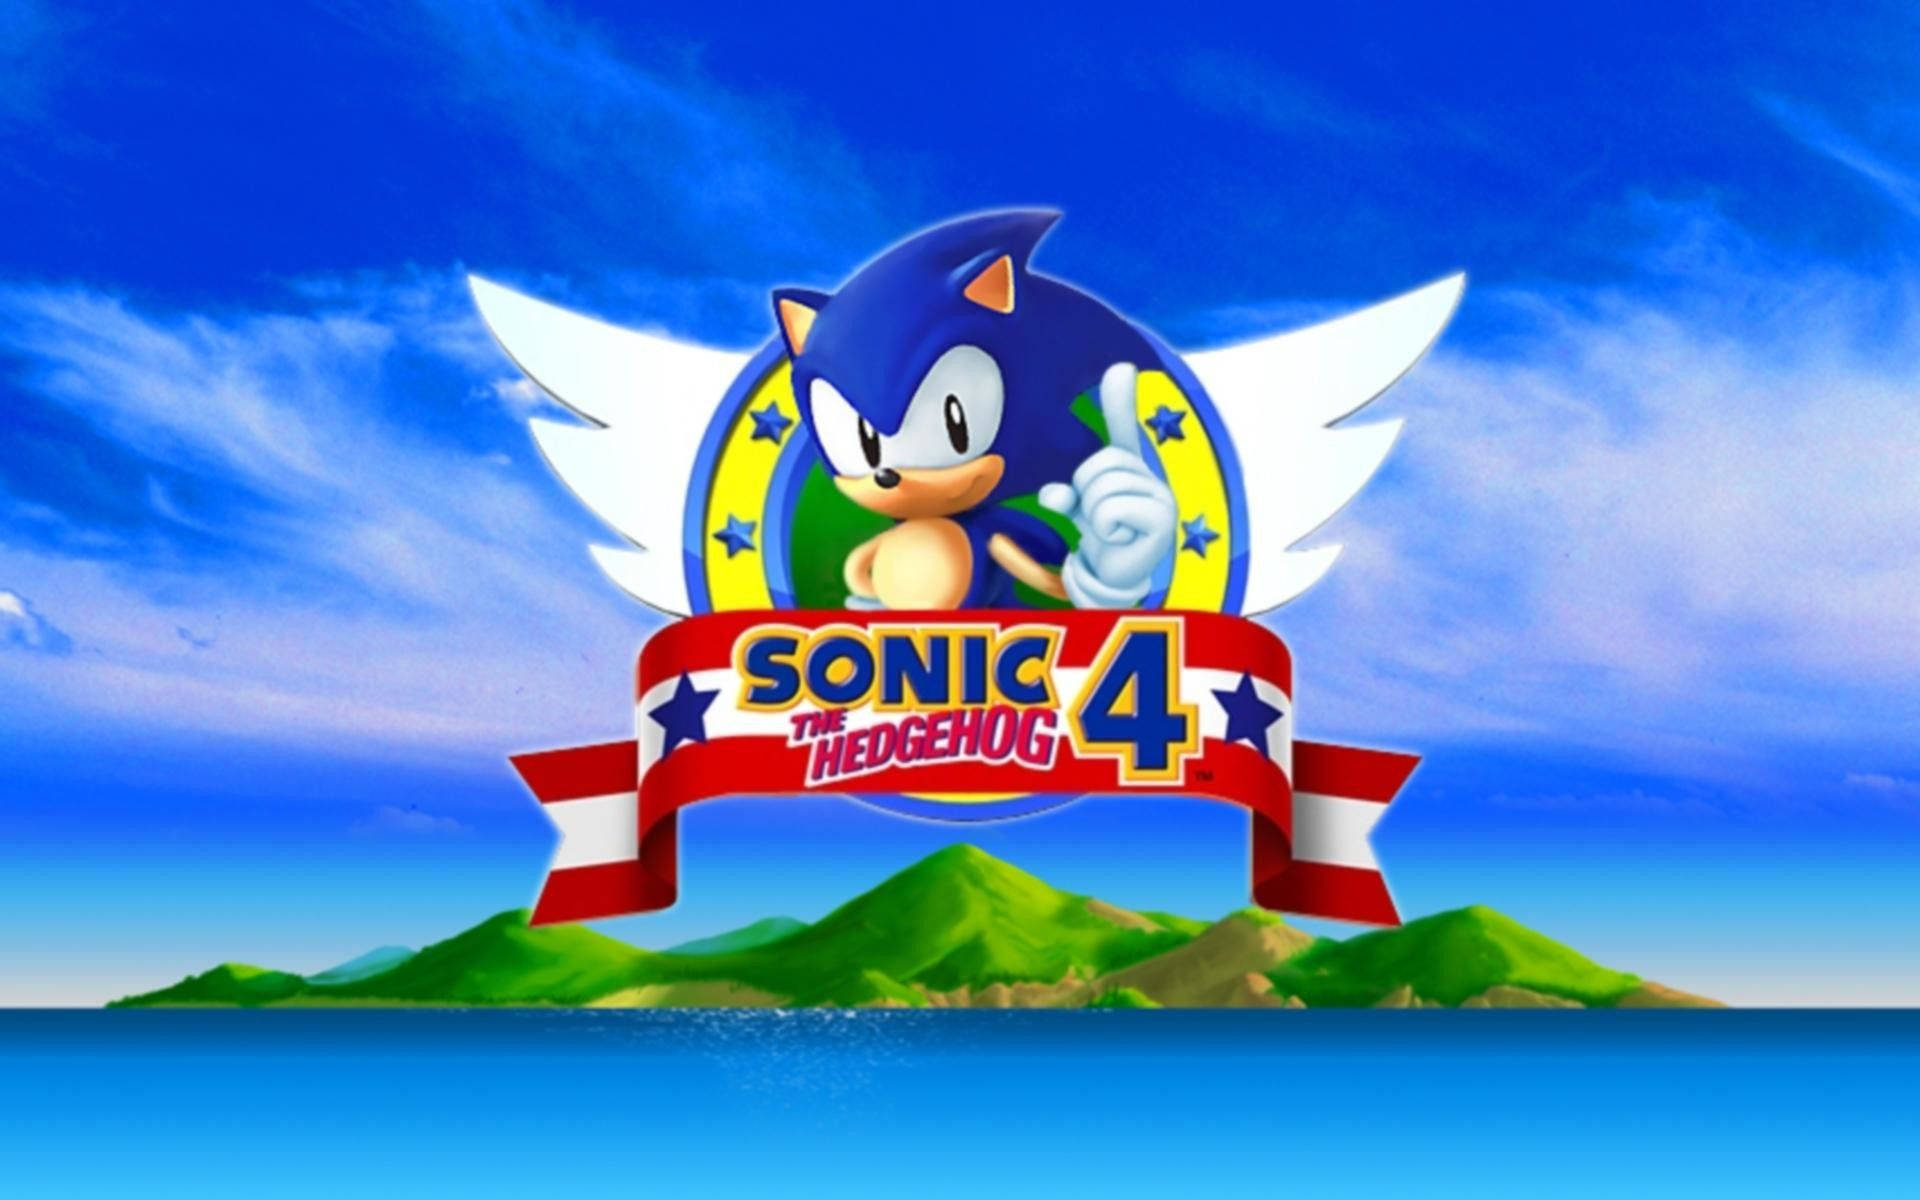 Sonic The Hedgehog 4 Game Hd Cover Wallpaper